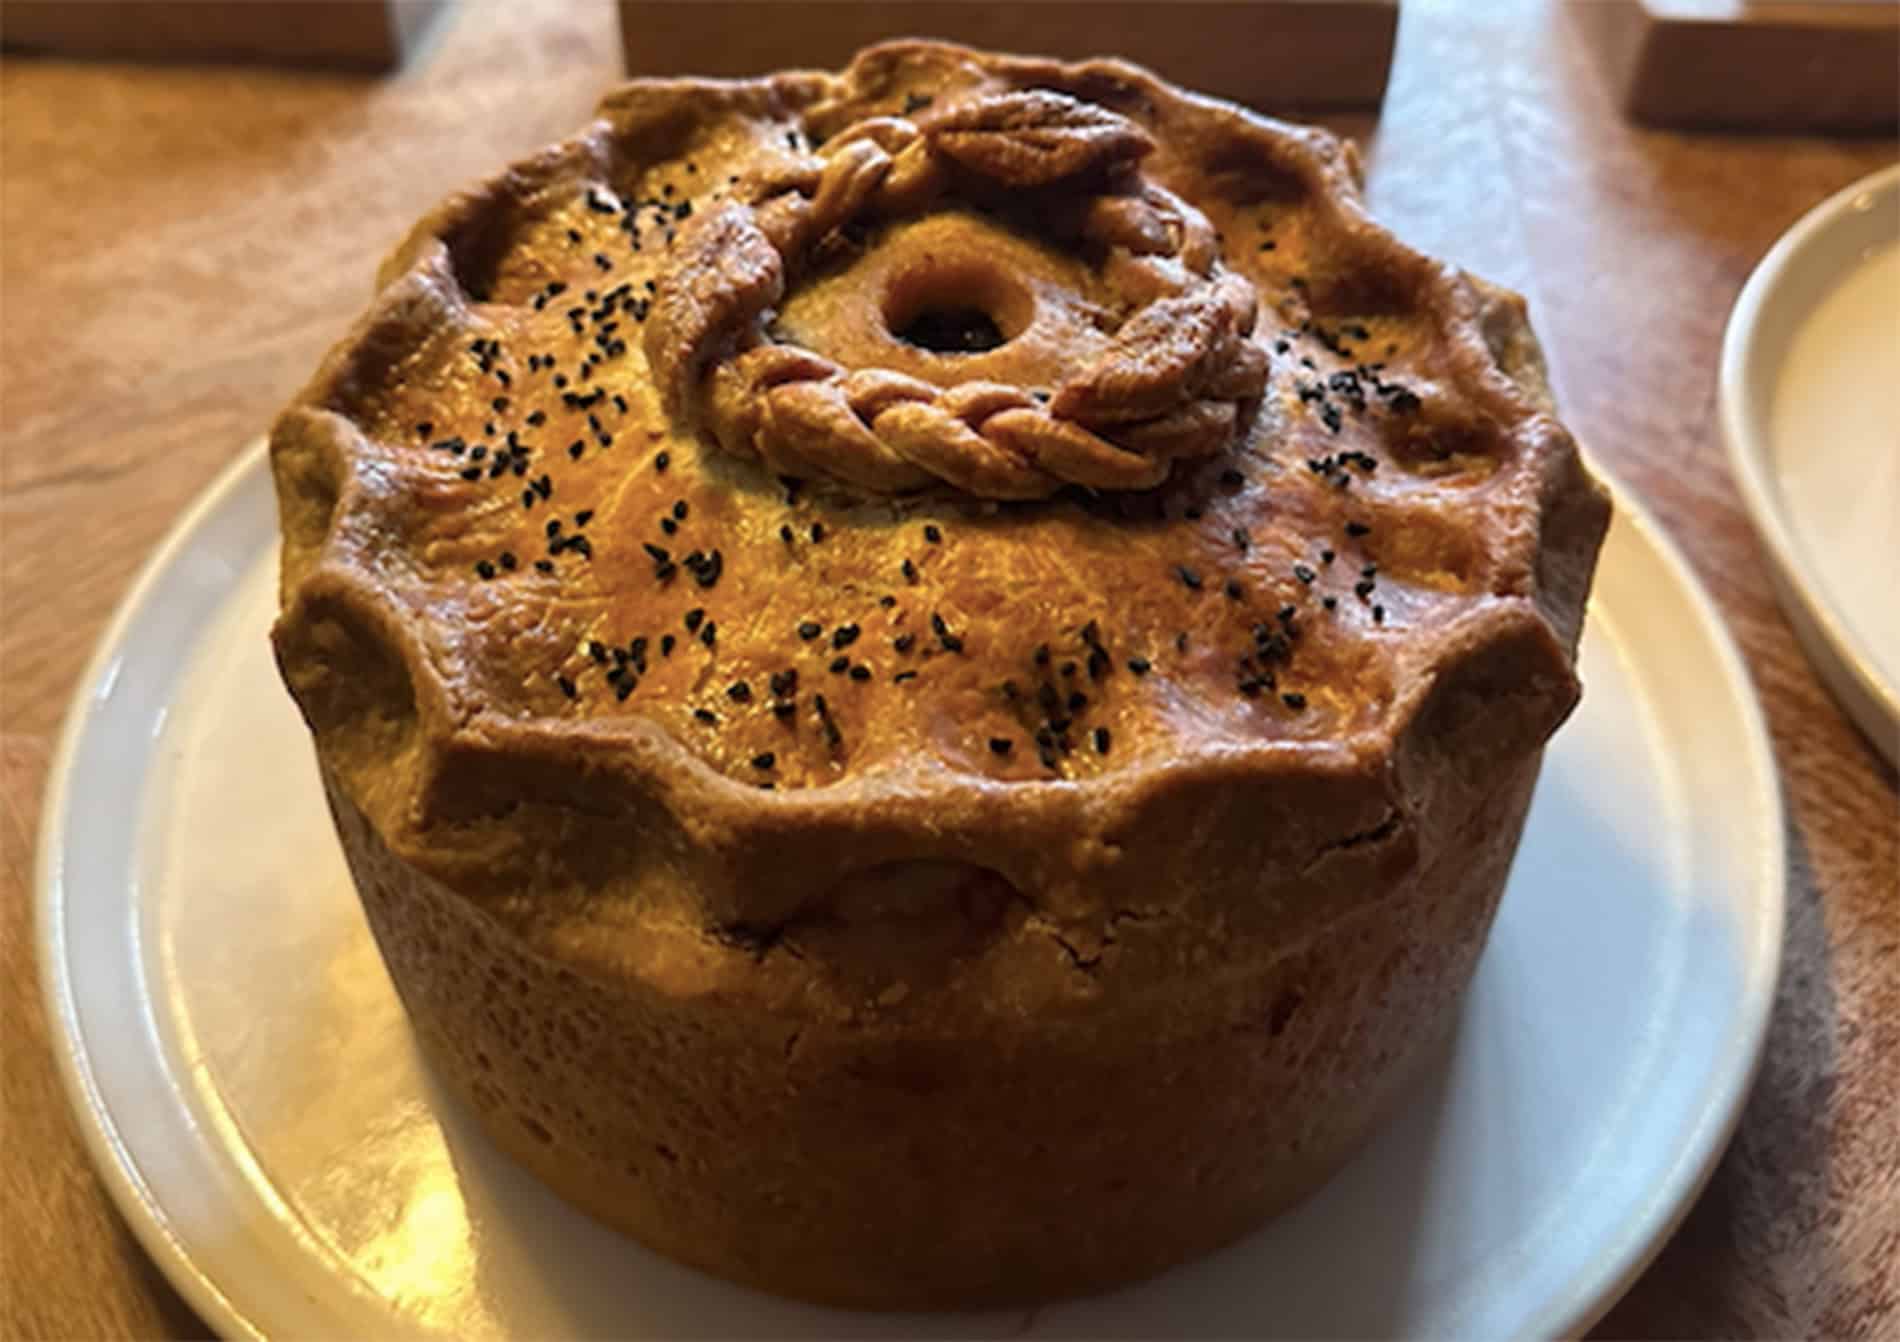 Rob Boer’s award-winning pork pie to be sold in London for one weekend only